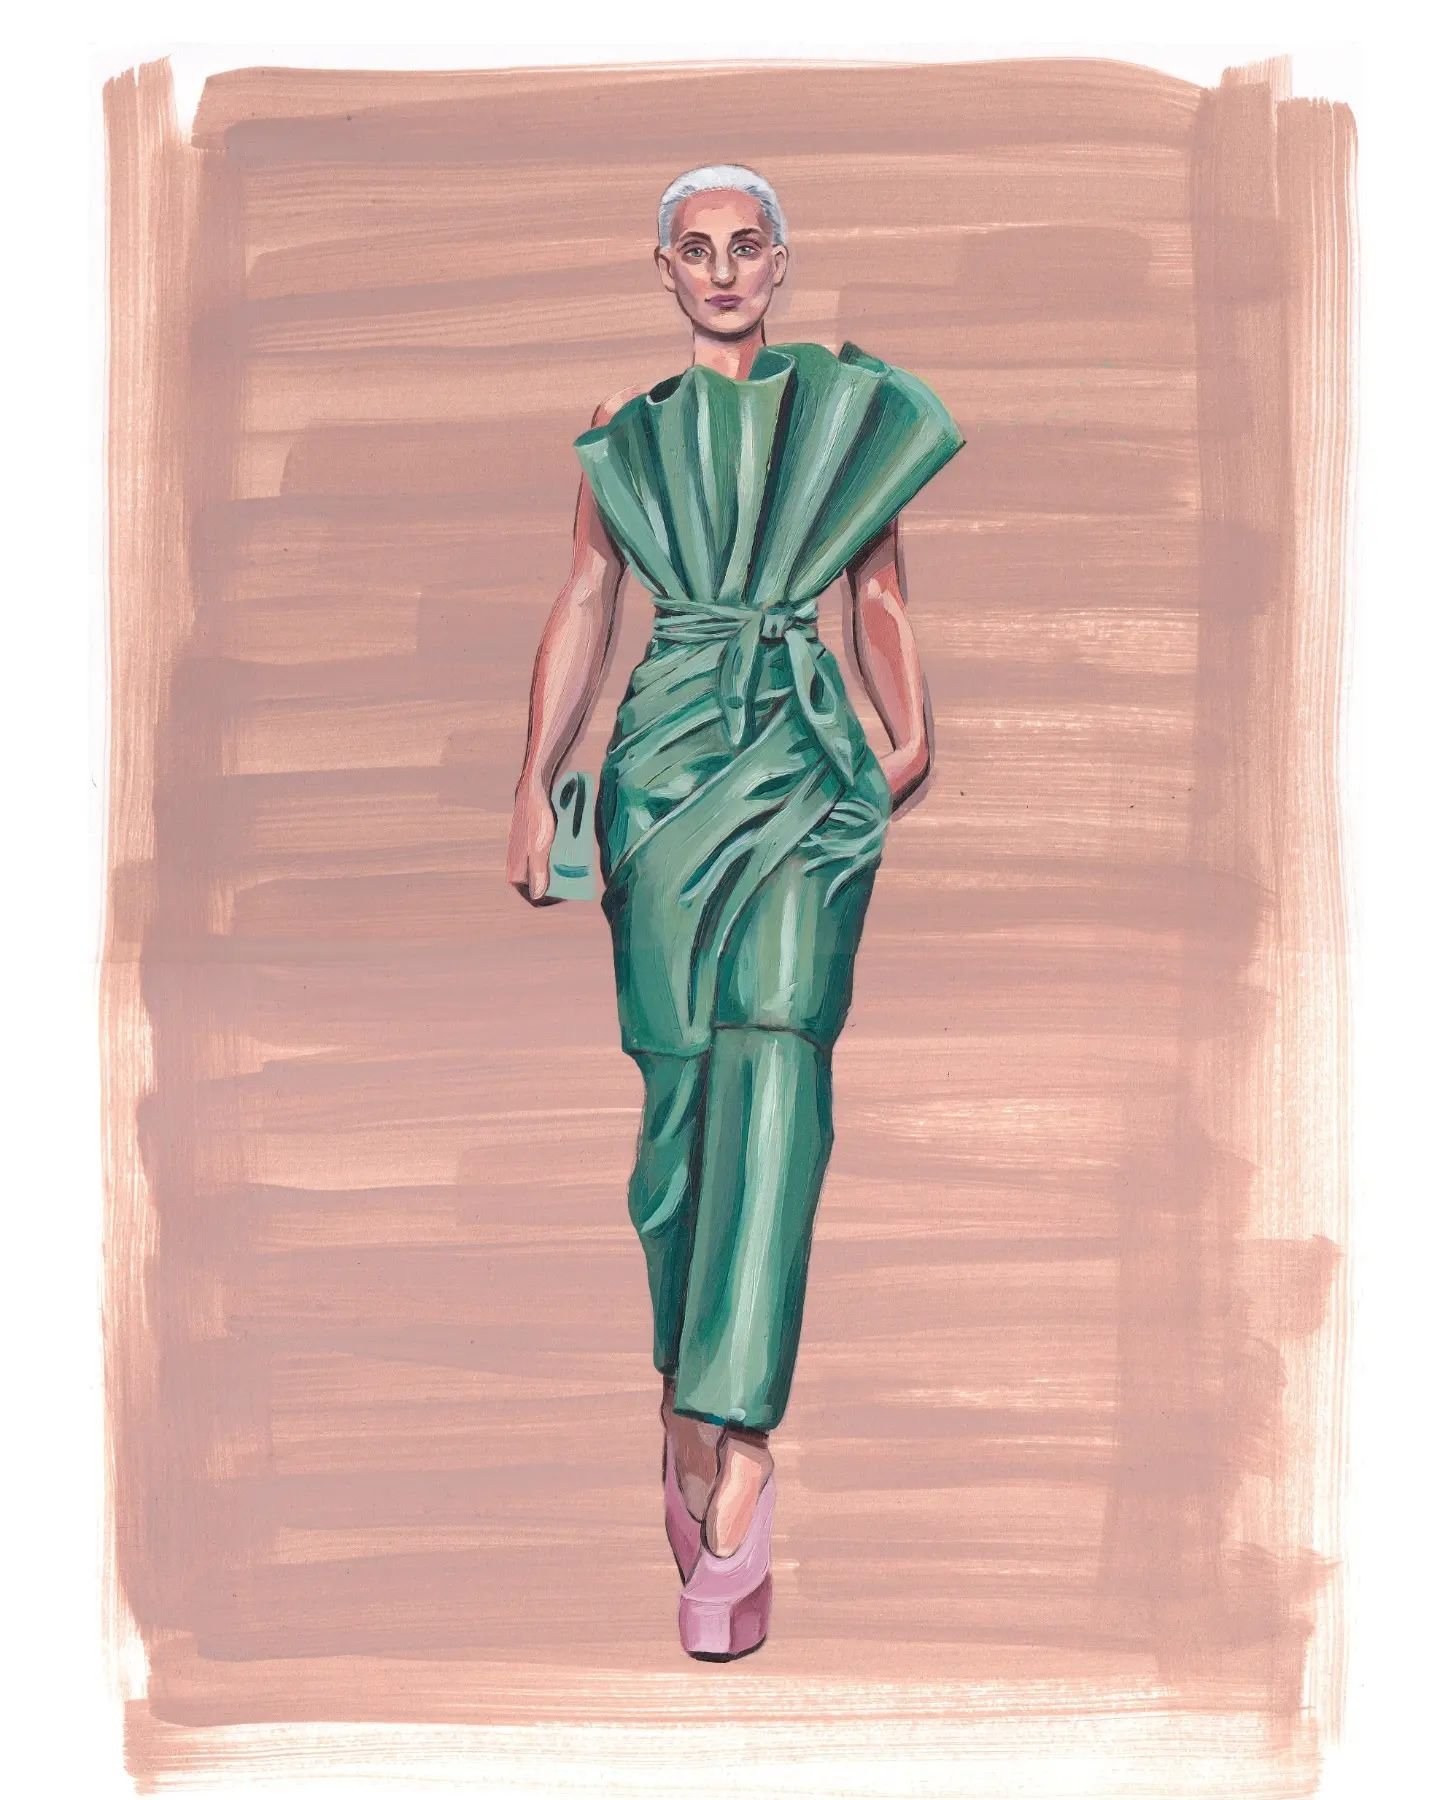 Oil painting on paper inspir&eacute;s by @balmain 🎨🎨
.
.
.
.
.
#fashionillustrator #fashiondrawing #fashionsketch #dessinatrice #illustratrice #artistefrancais #dessindemode